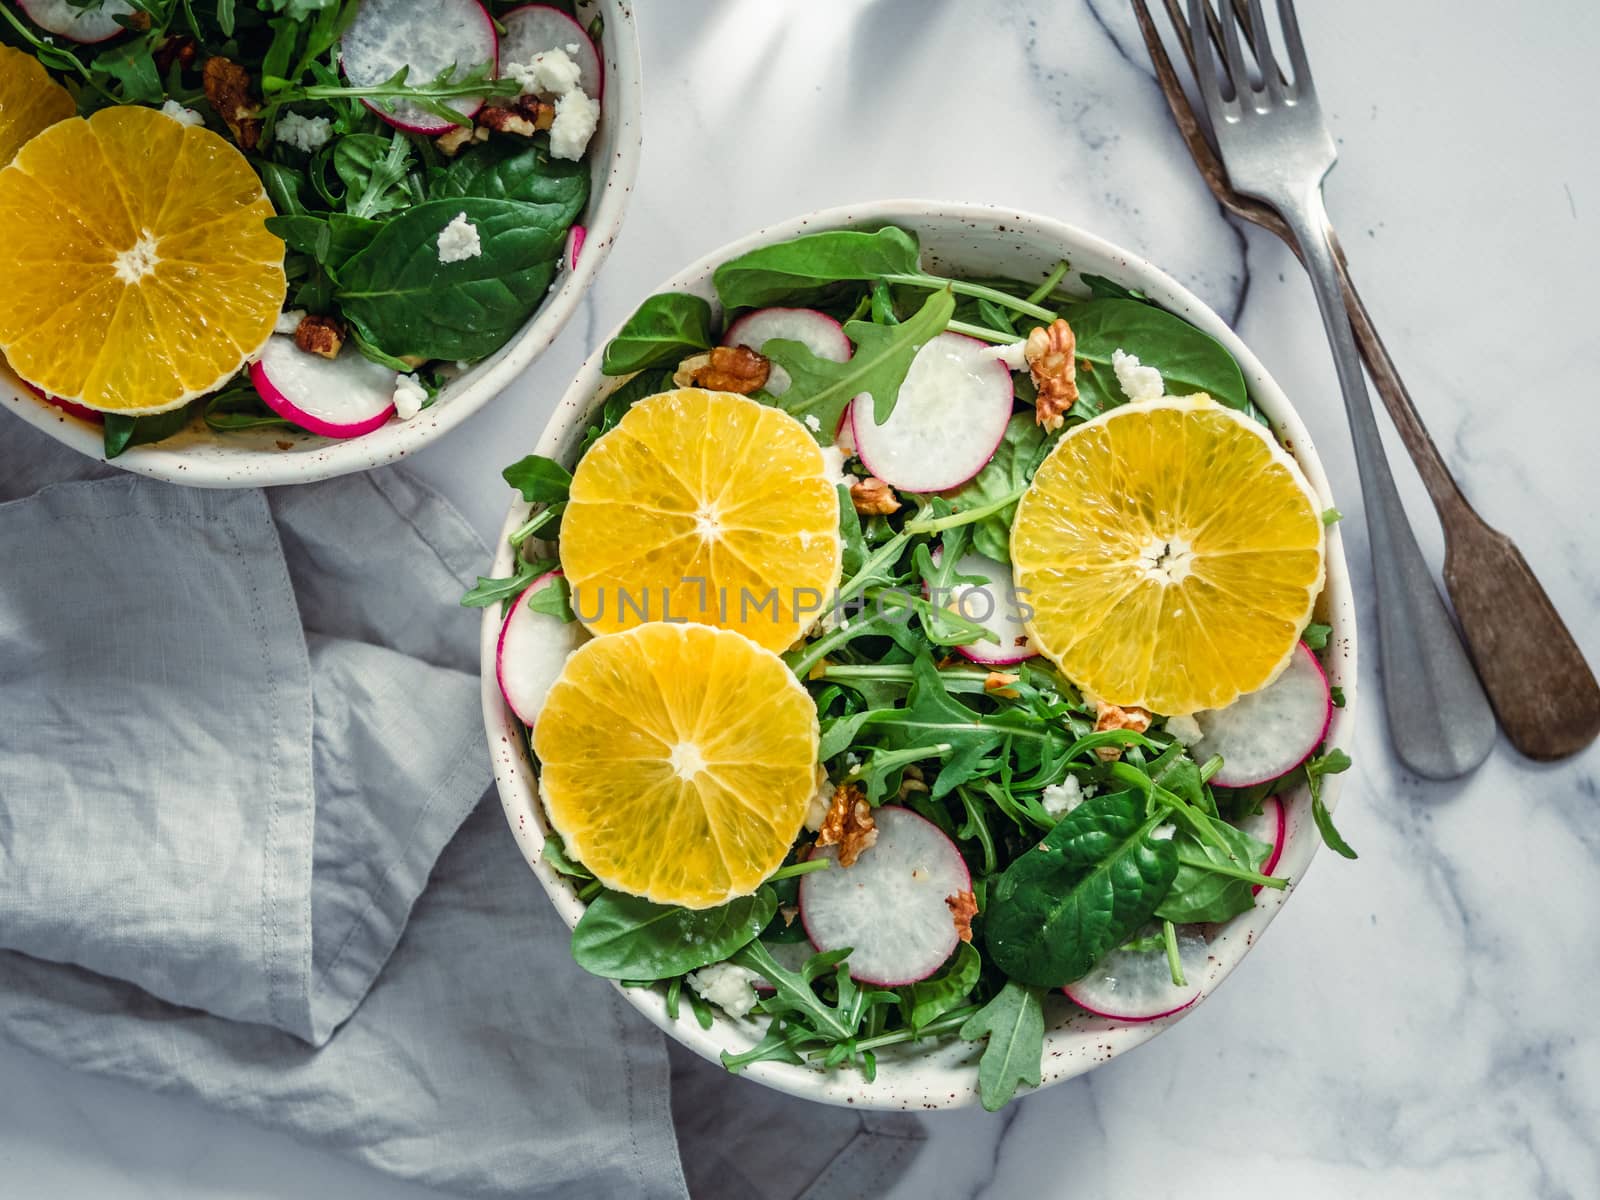 Vegan salad bowl with oranges, spinach, arugula, radish, nut. Top view. Vegan breakfast, vegetarian food, diet concept. Two bowls with salad on white marble tabletop